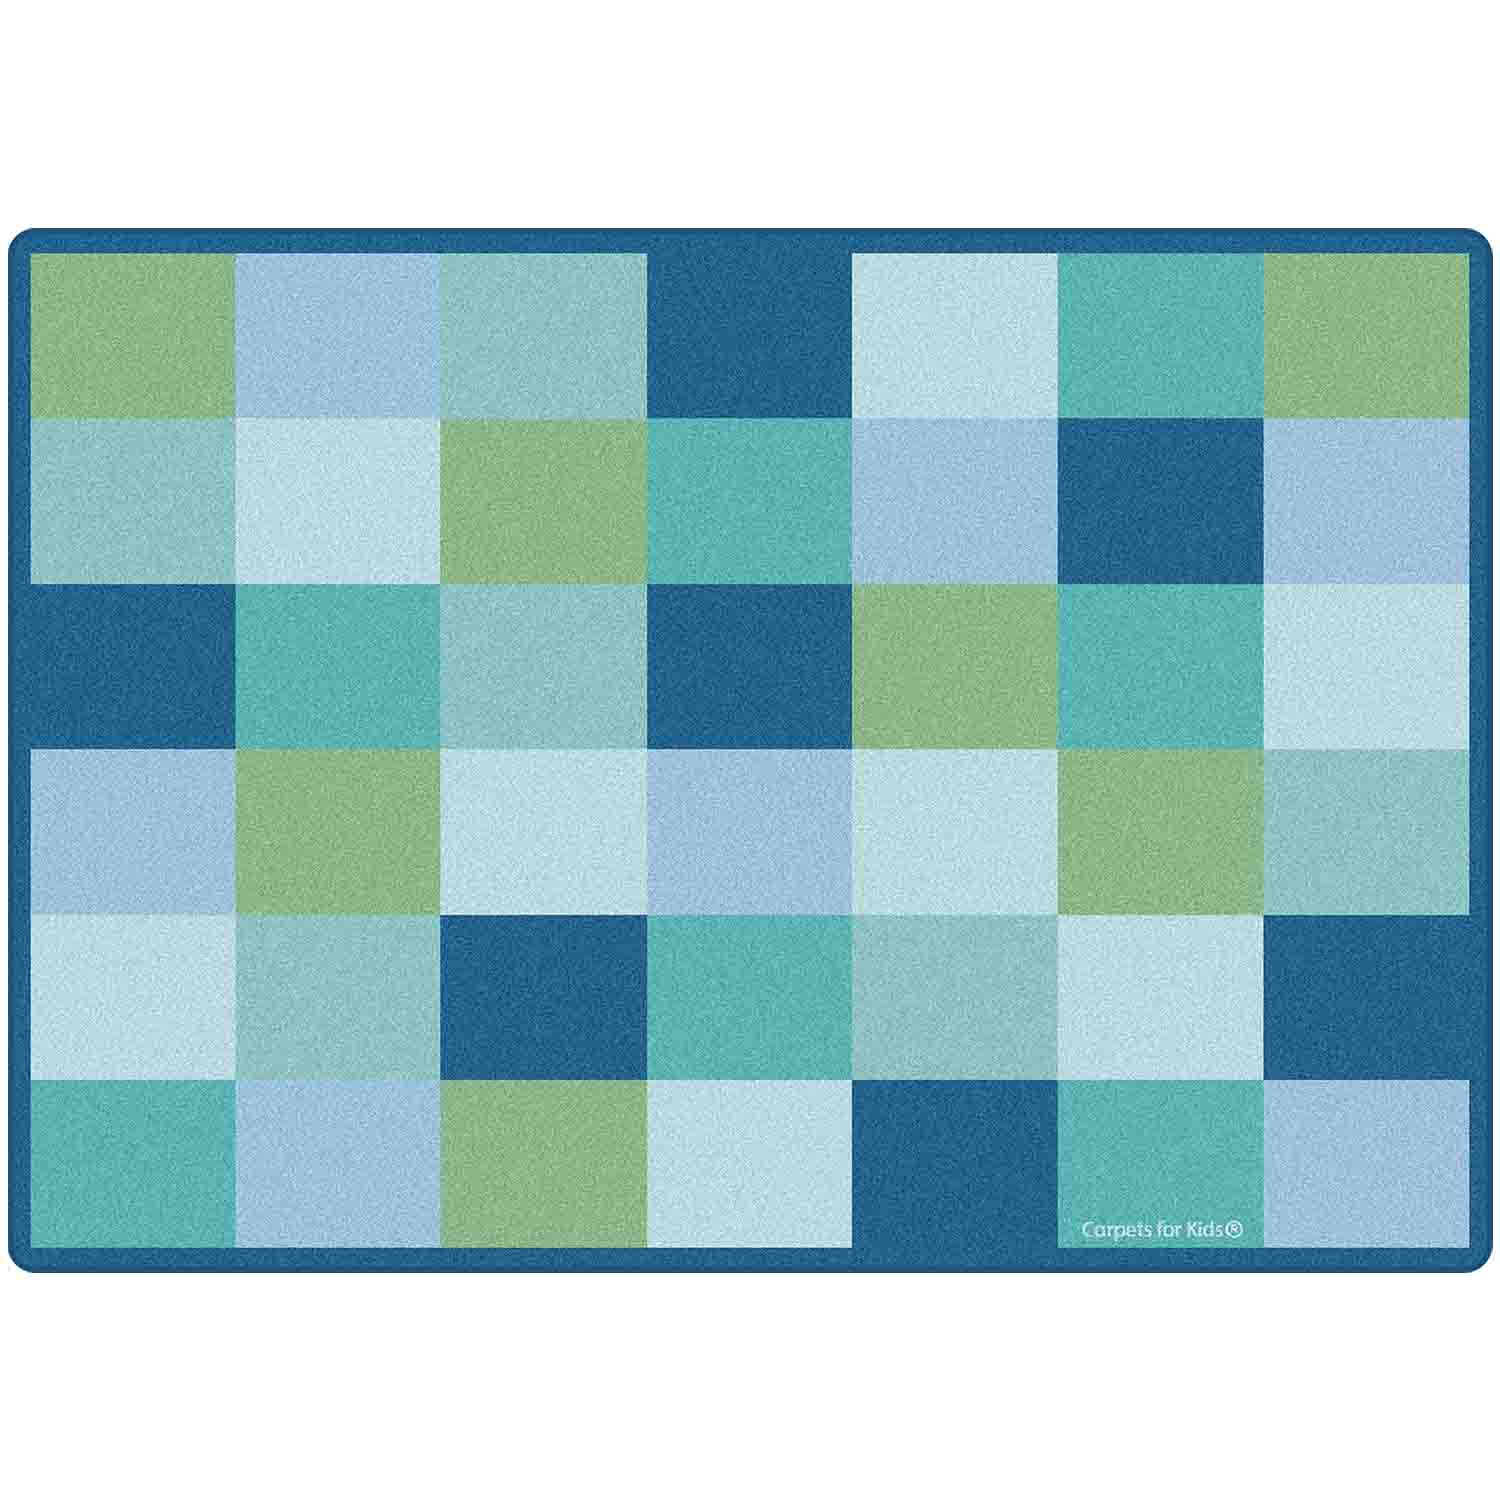 KIDSoft™ Block Seating Rug, Contemporary Colors Rectangle 6' x 9'